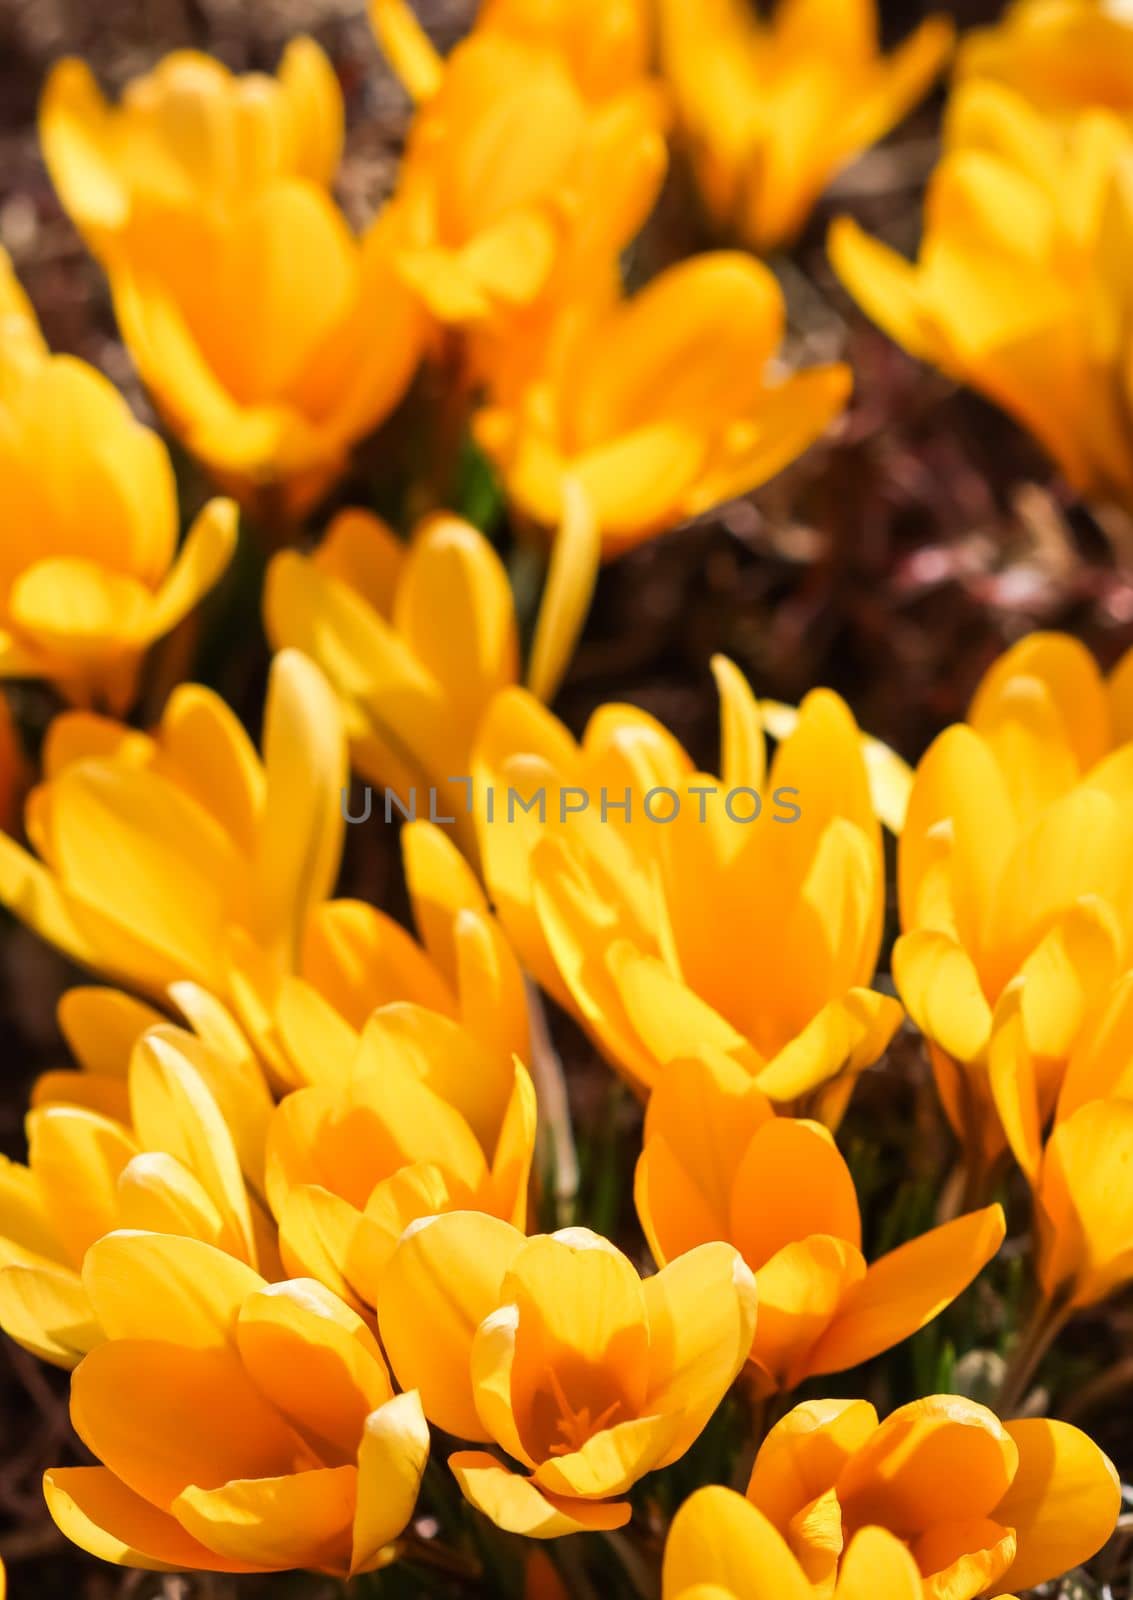 Abstract floral background, yellow crocus flower petals. Macro flowers backdrop for holiday brand design